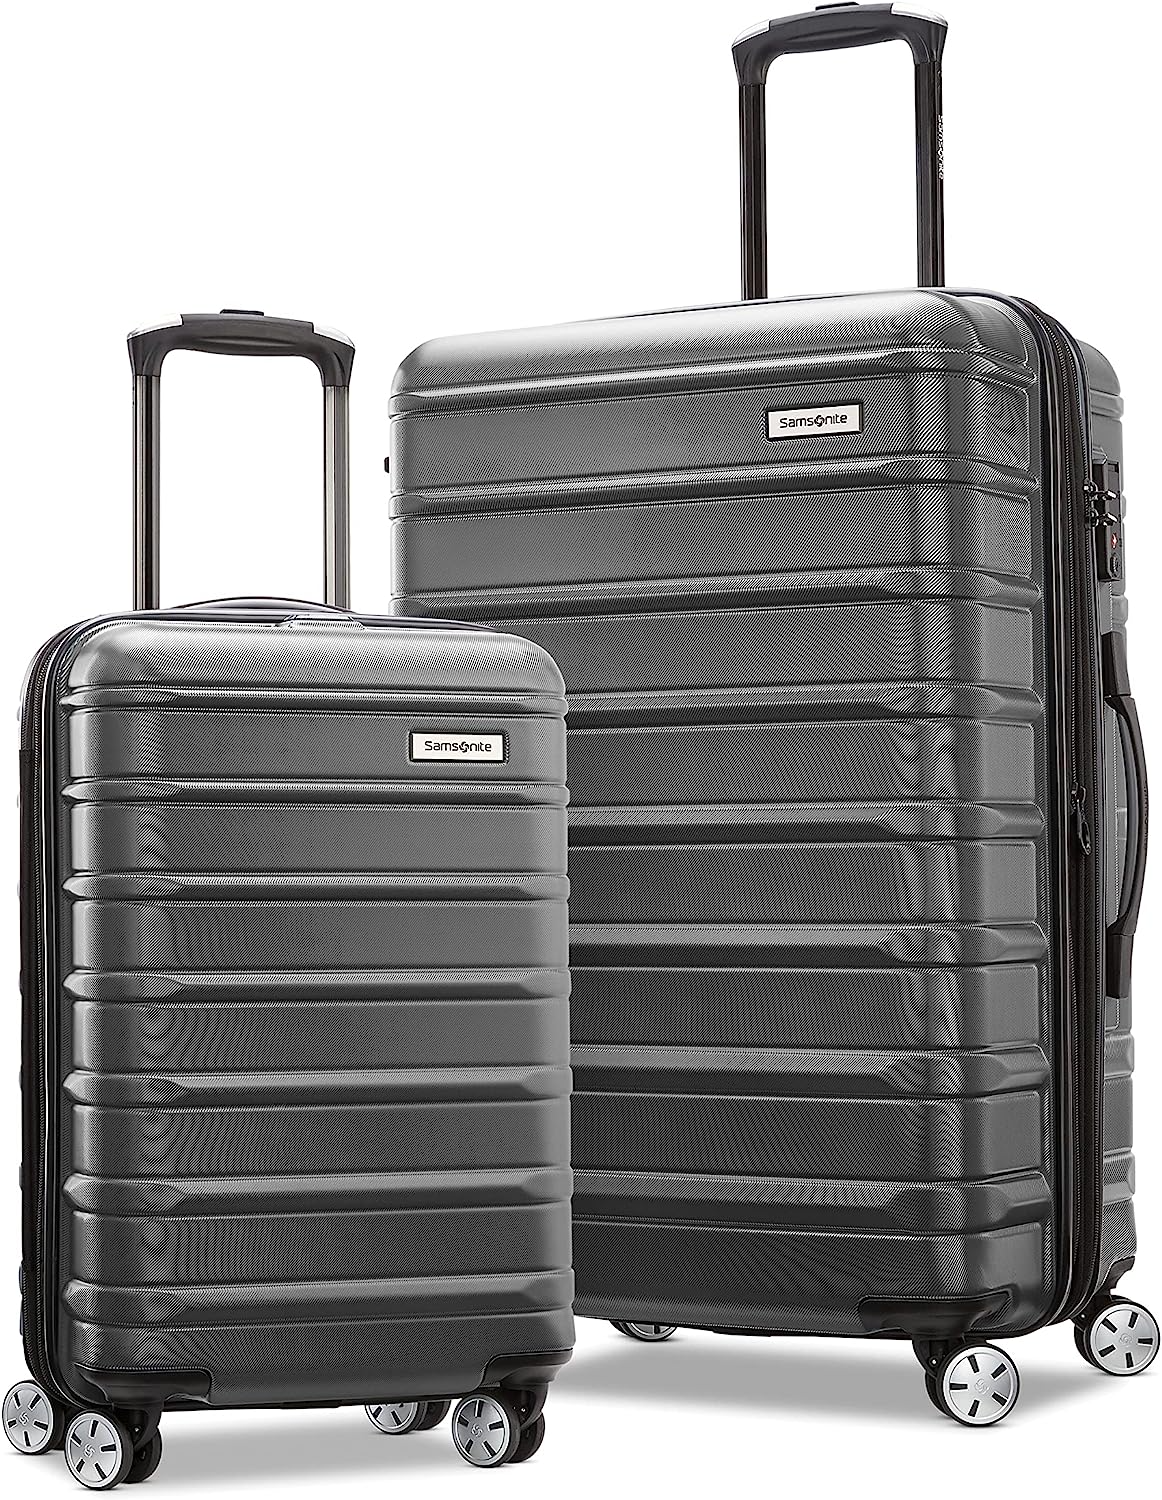 Samsonite + Omni 2 Hardside Expandable Luggage with Spinners